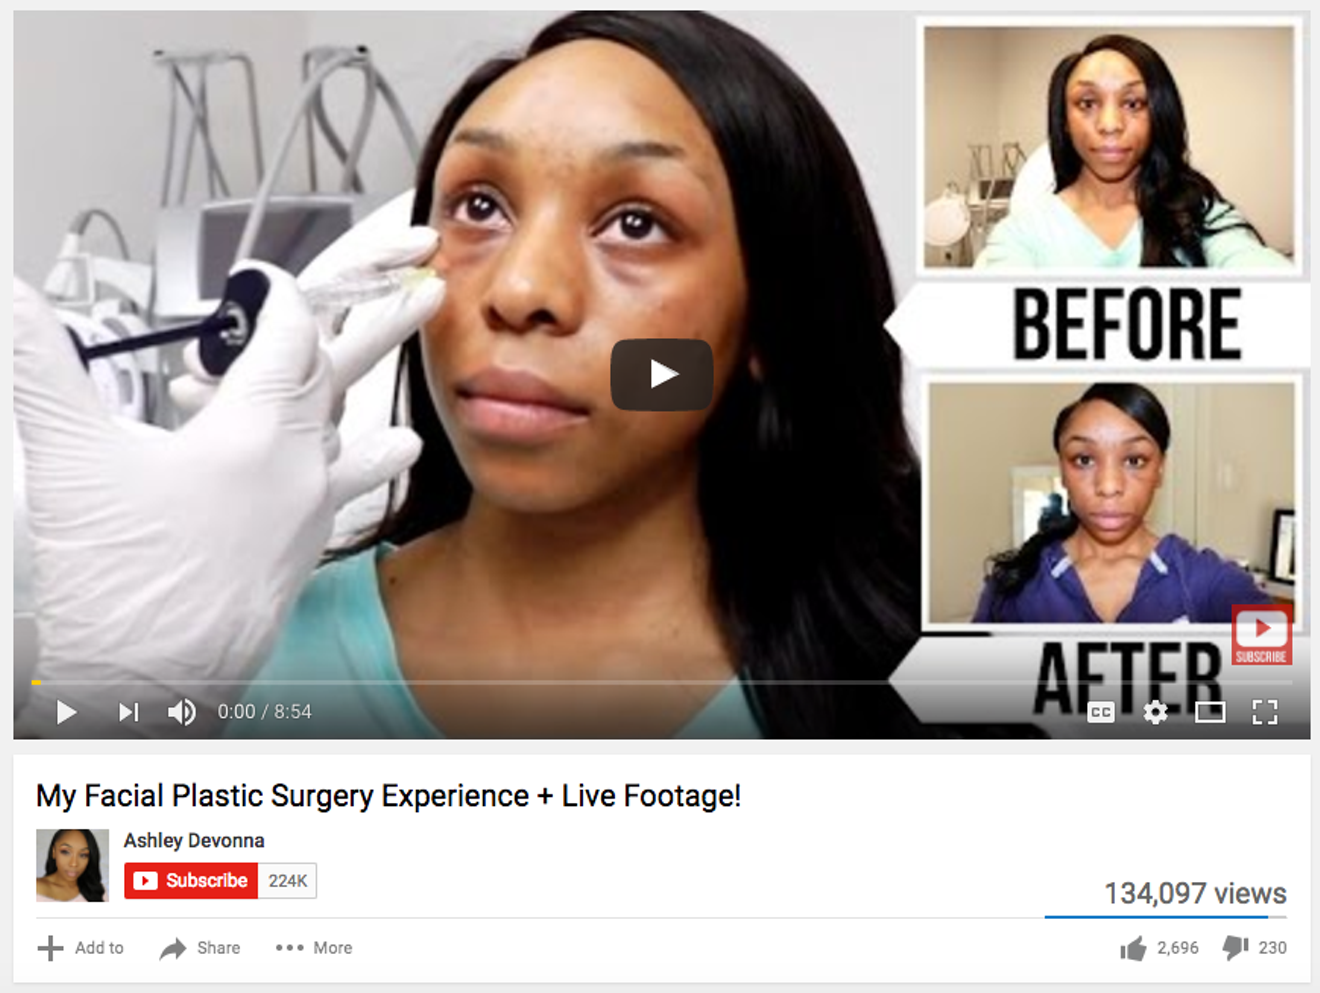 Ashley Devonna vlogged her under-eye filler procedure in March. She will do the same Friday for her breast augmentation.